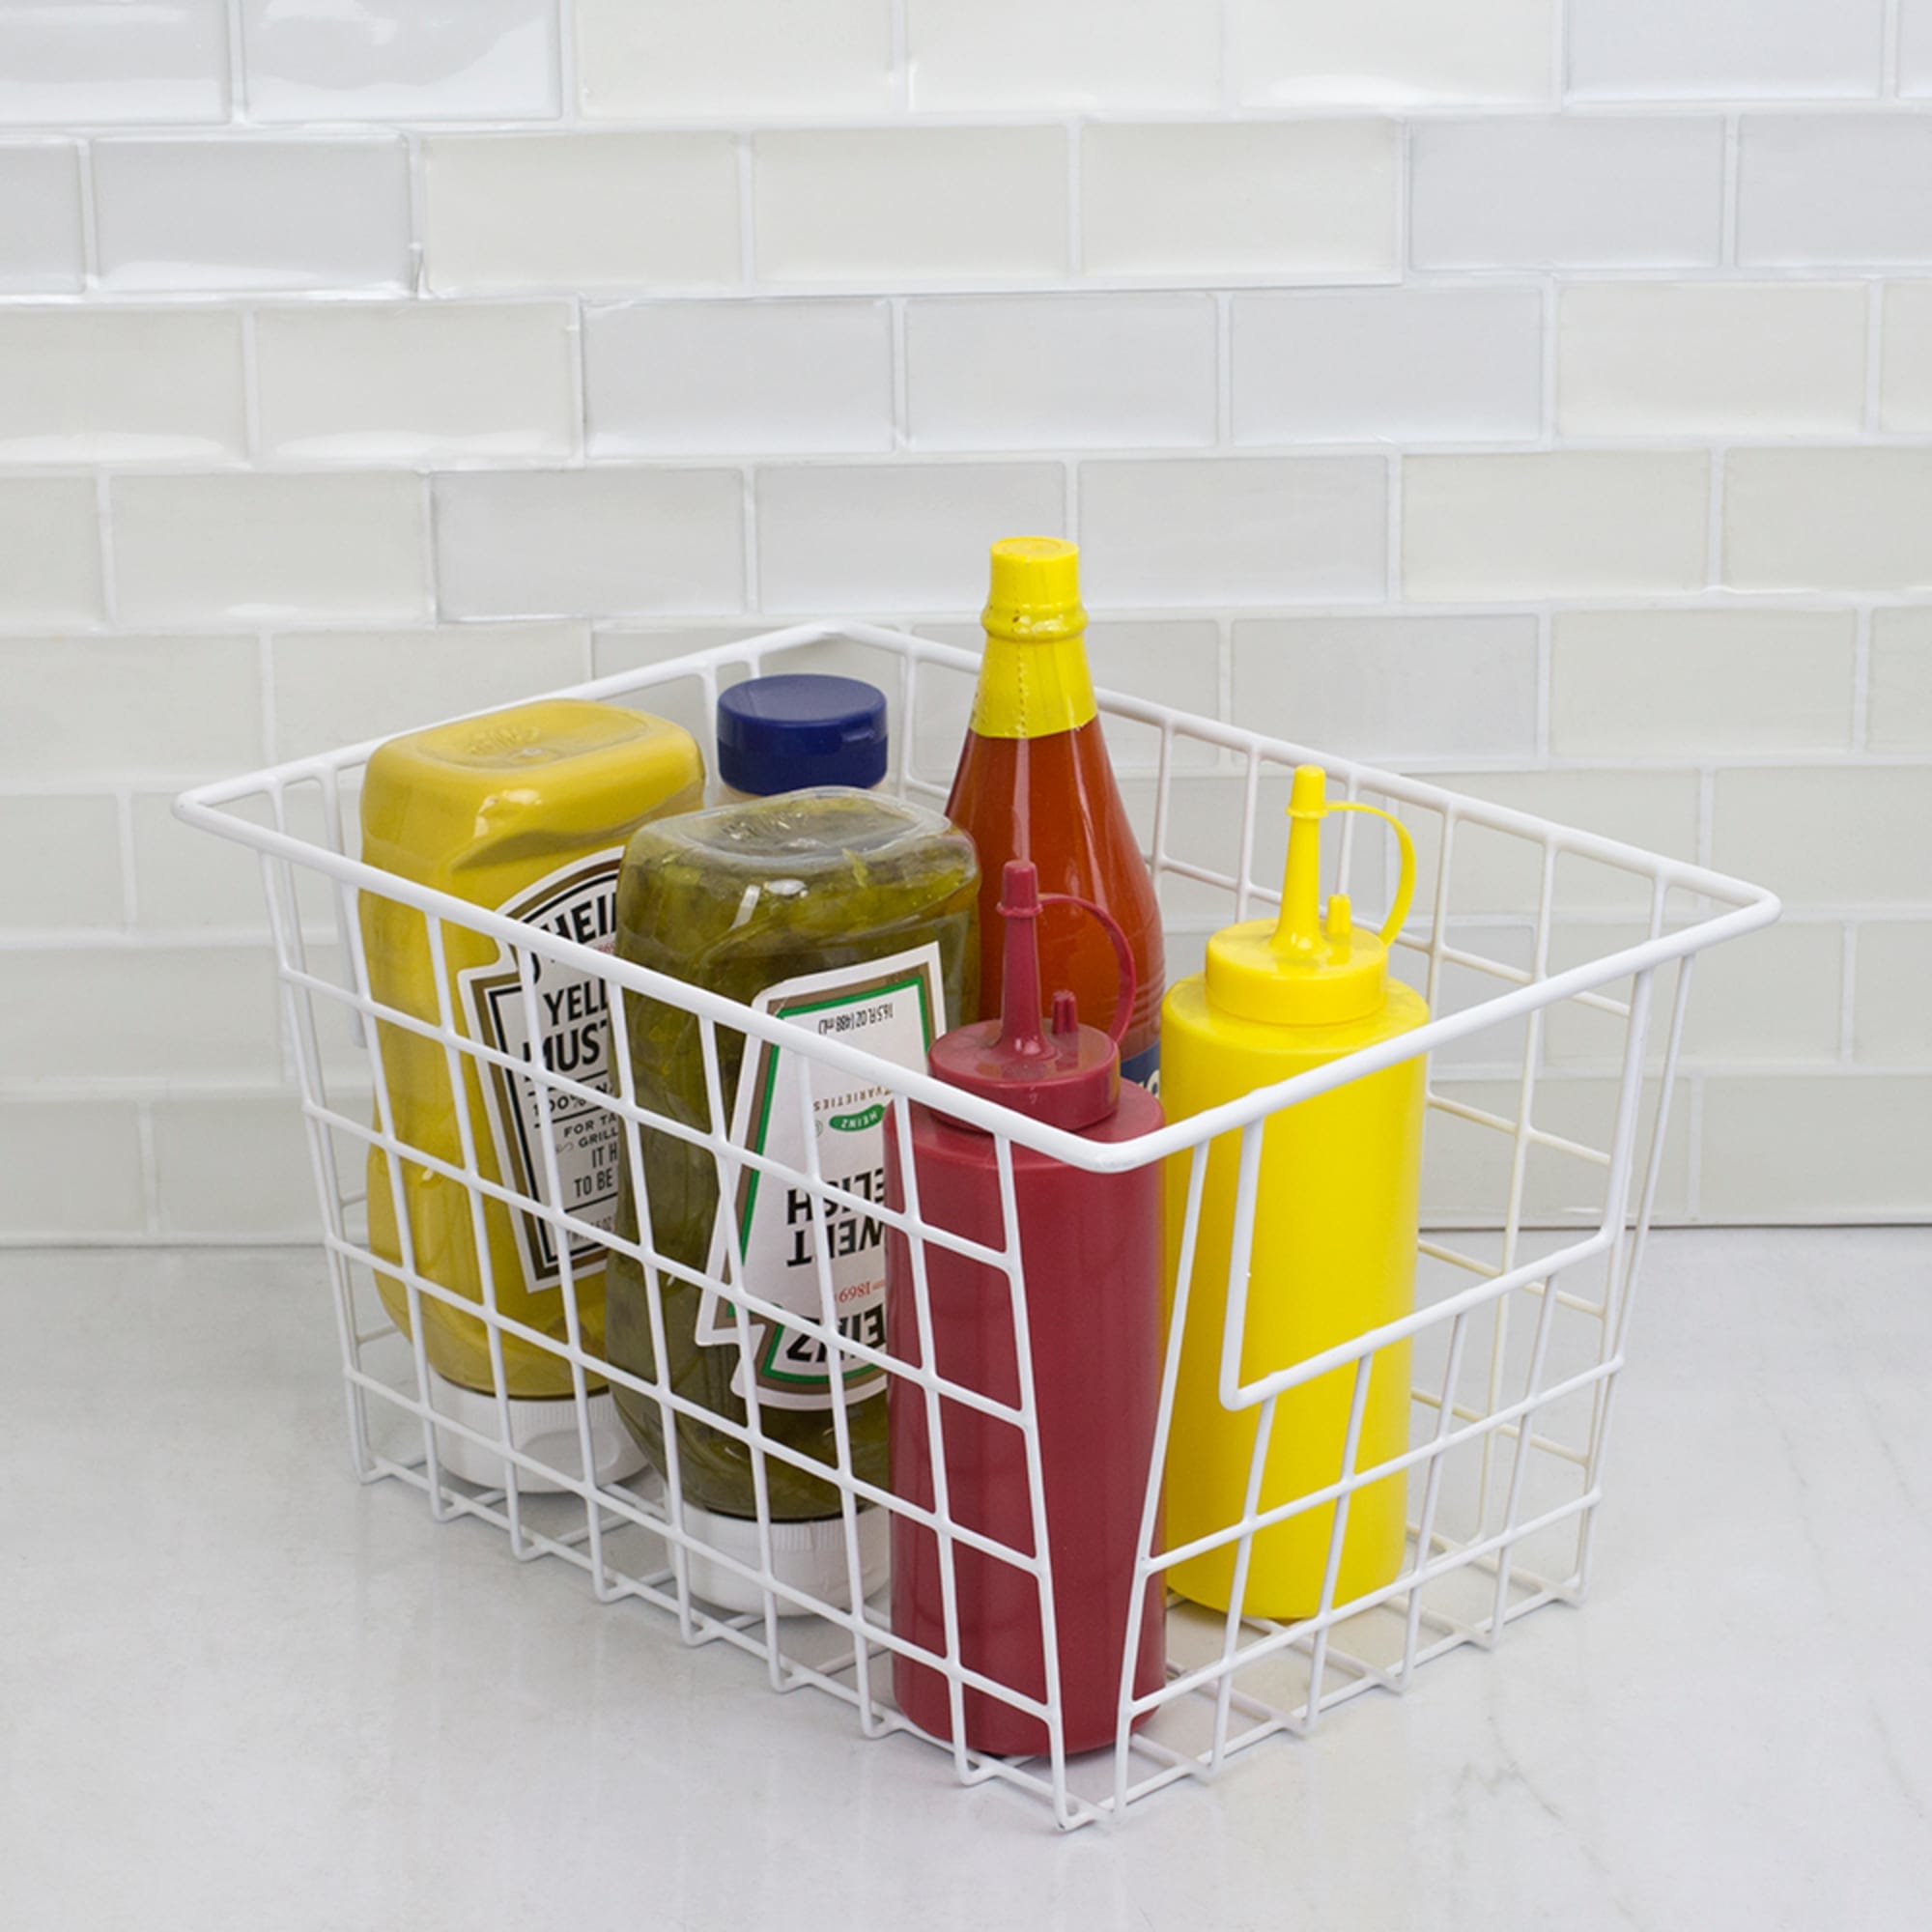 Home Basics 10.5" x 6.5" Vinyl Coated Steel Pull Out Wire Storage Basket, White $3.00 EACH, CASE PACK OF 12